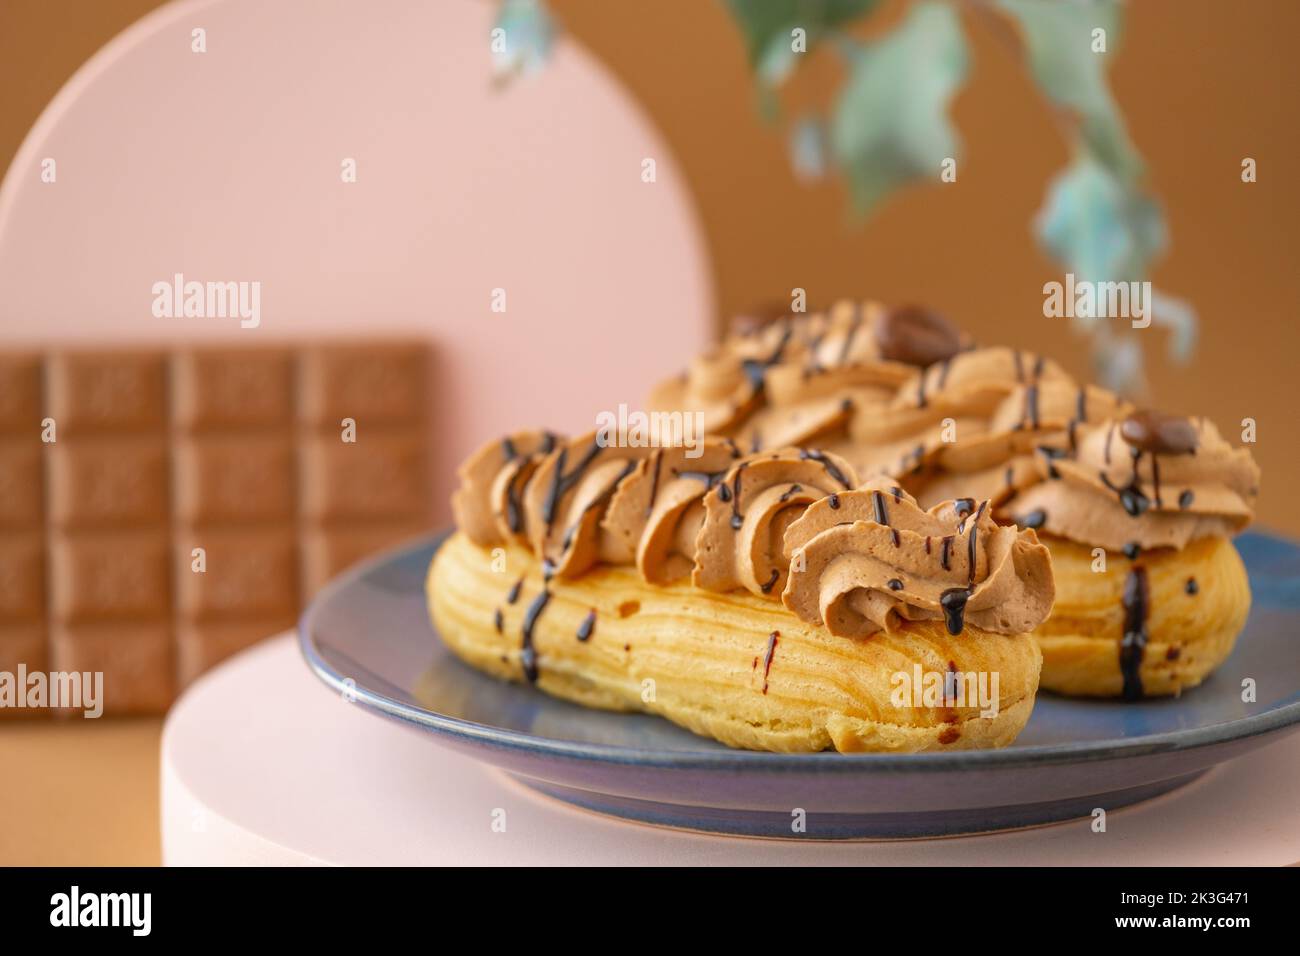 Eclairs chocolate cakes.Custard cakes with chocolate cream and chocolate bar on brown background.Sweets and desserts. Baked goods and desserts.Eclairs Stock Photo